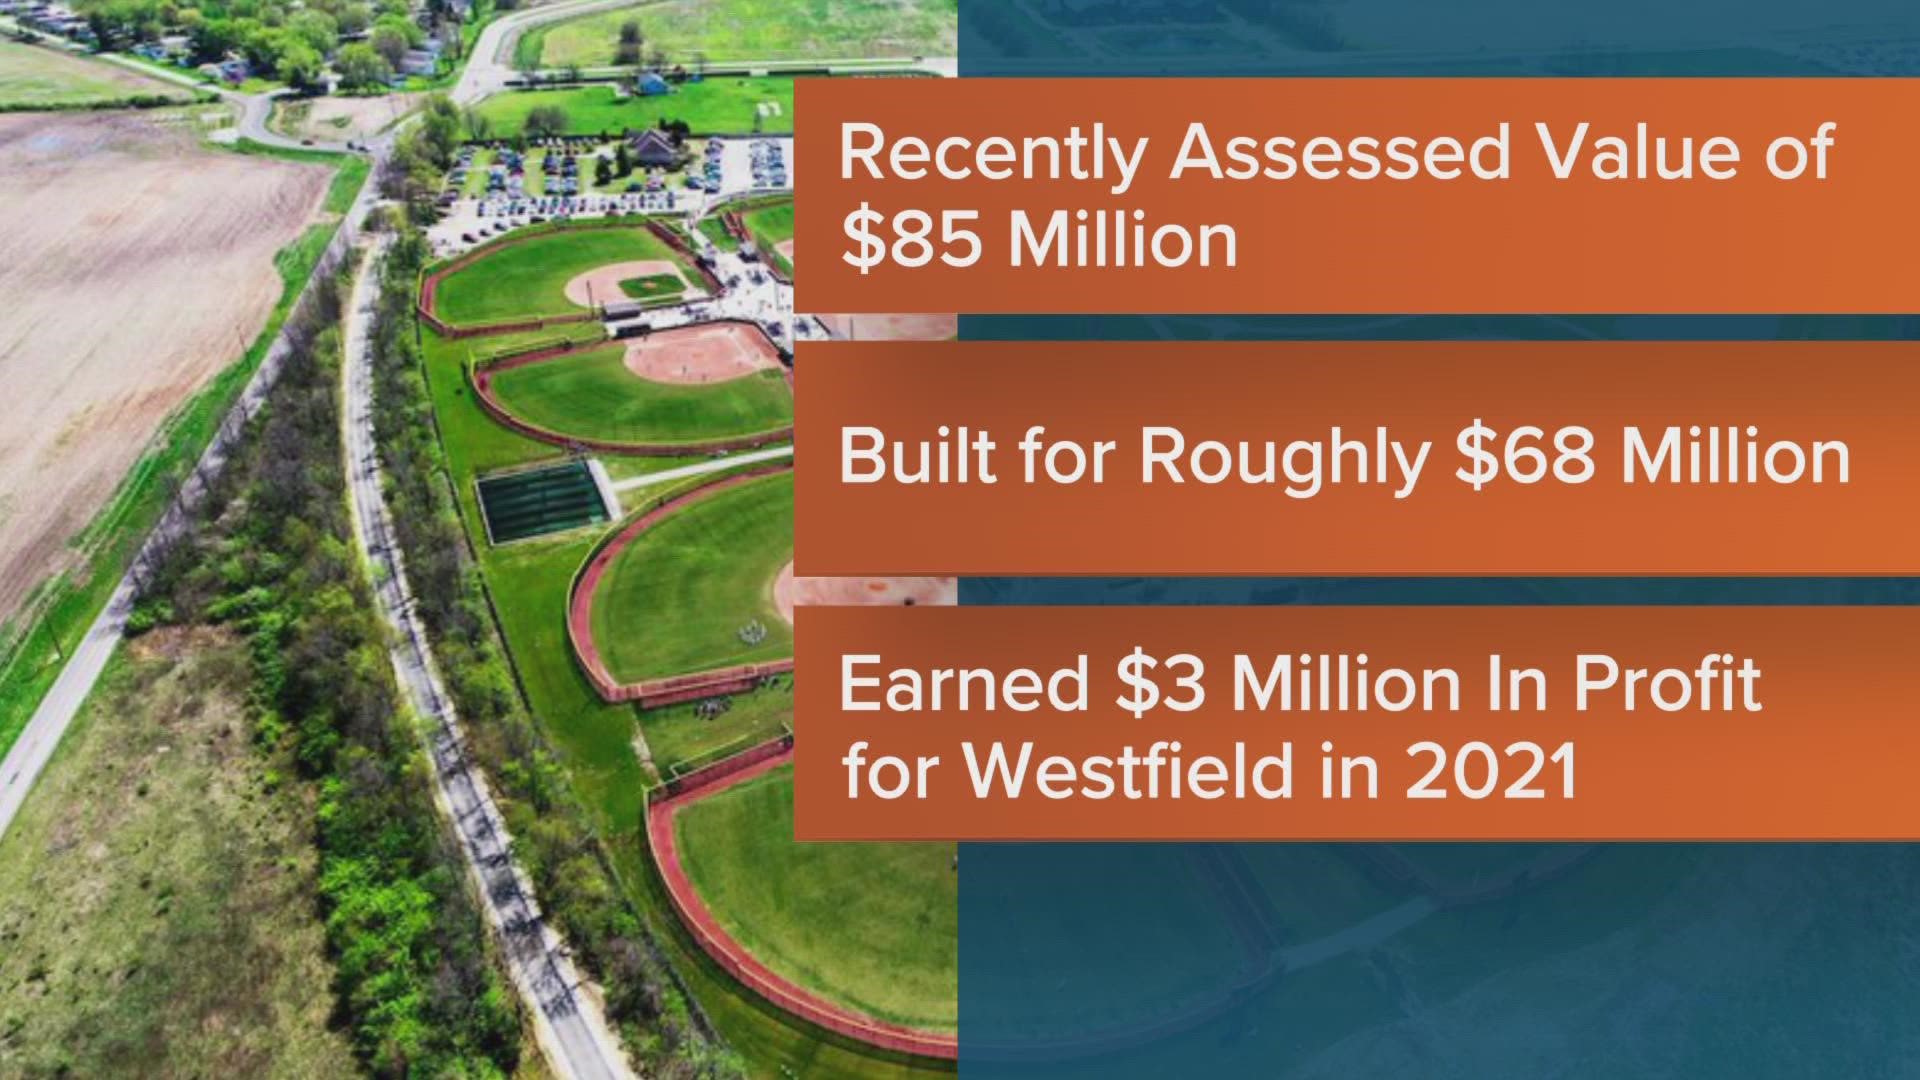 A week ago, Westfield released appraisals putting the value of the park at $85 million.